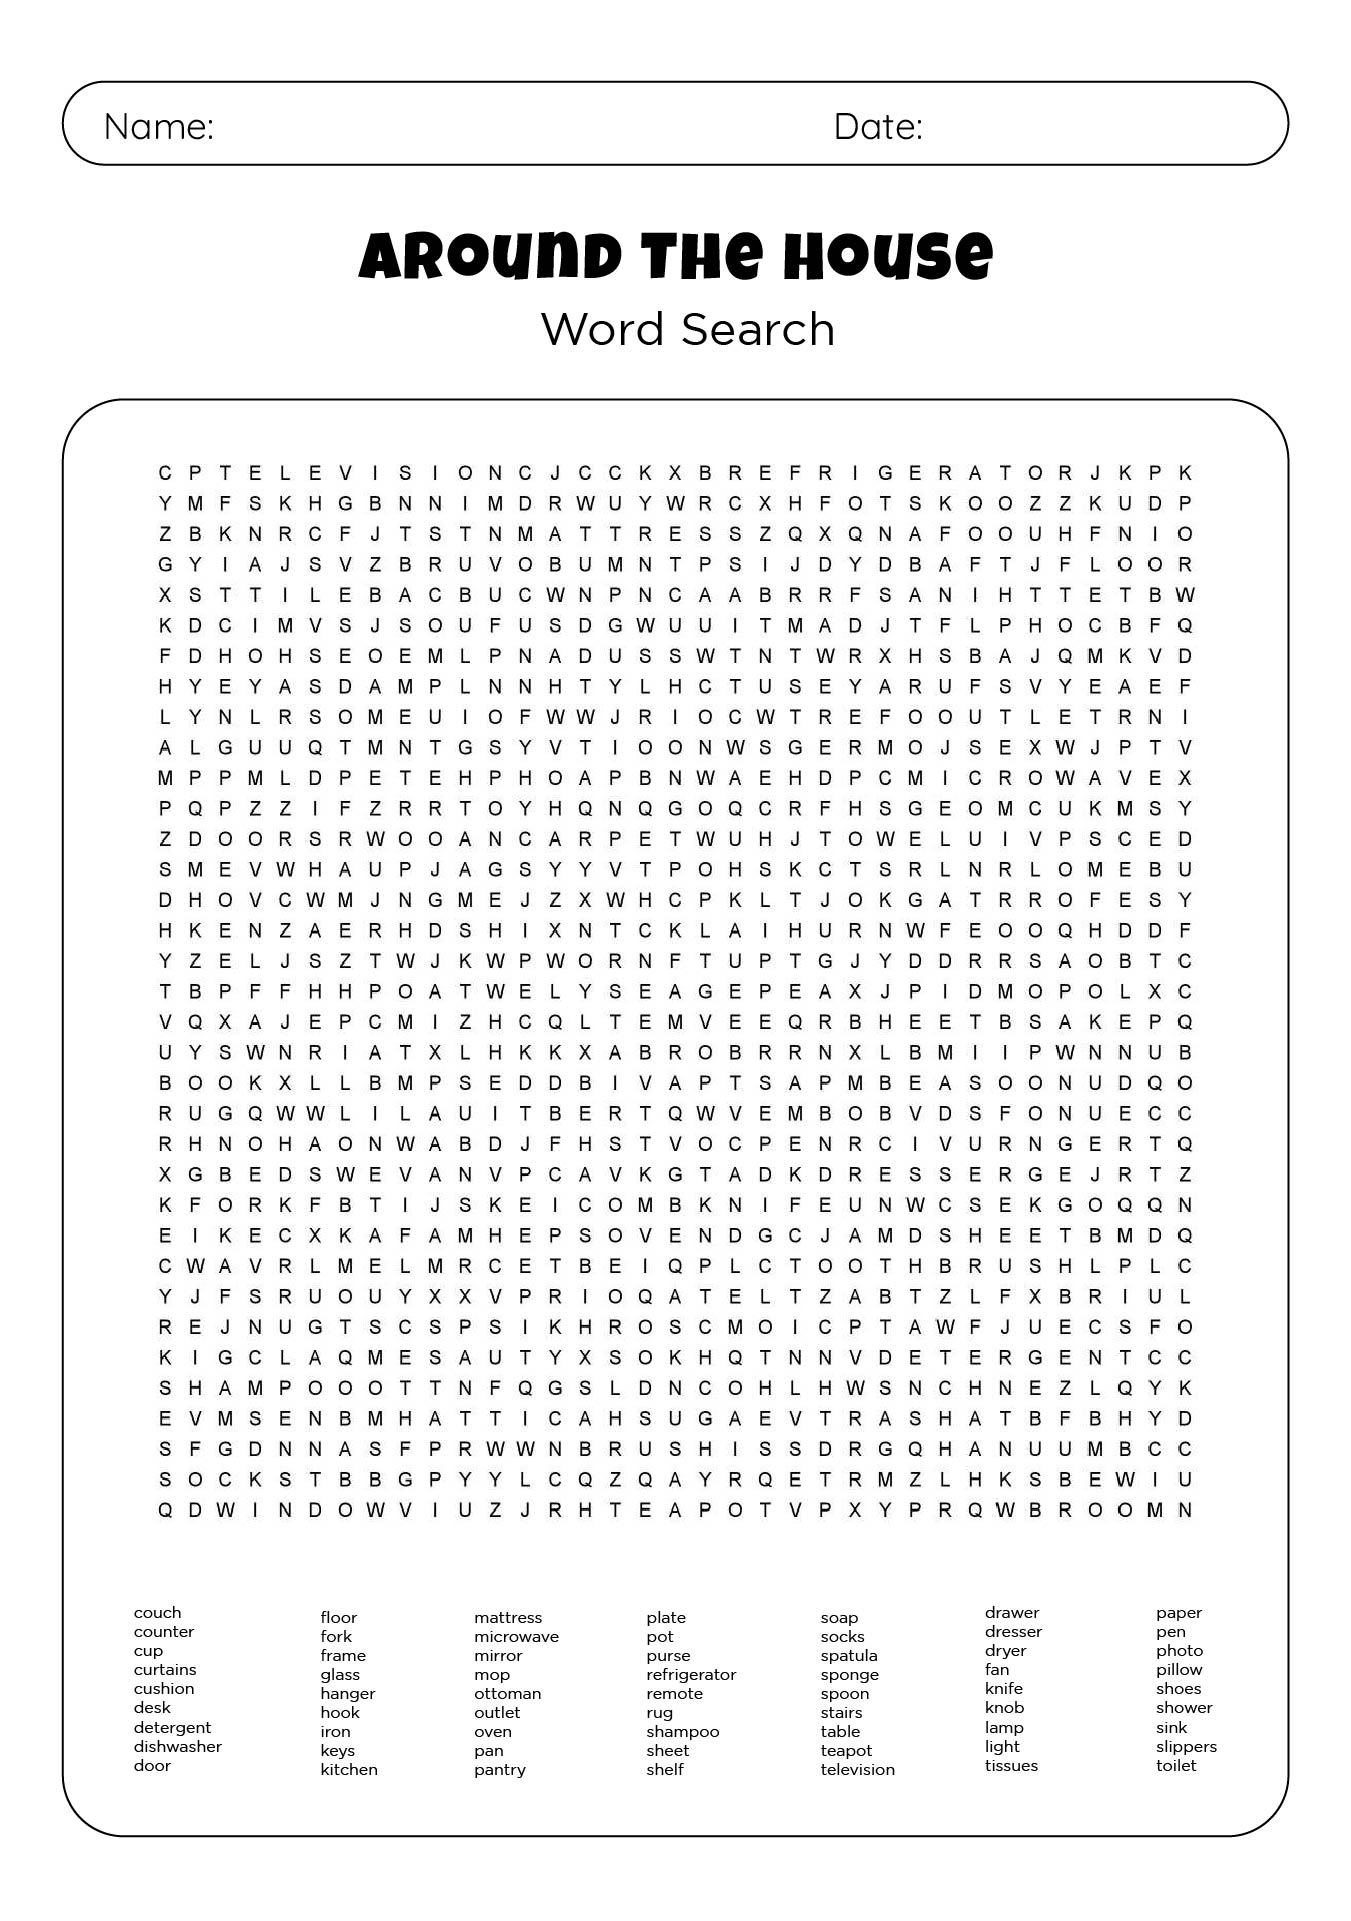 printable-word-searches-difficult